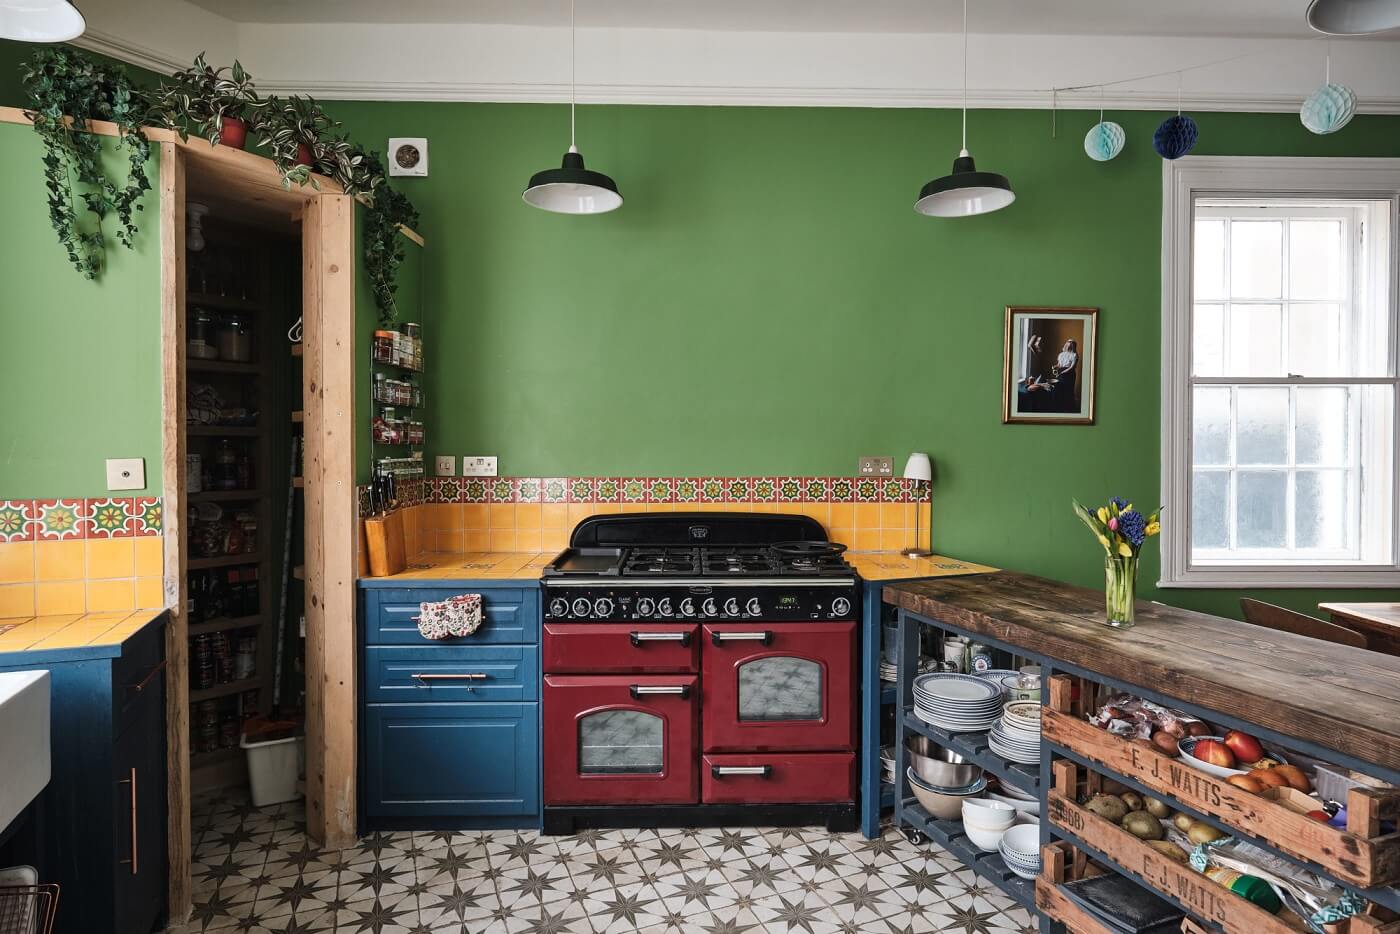 green-walls-blue-kitchen-cabinets-yellow-tiles-colorful-eclectic-home-nordroom